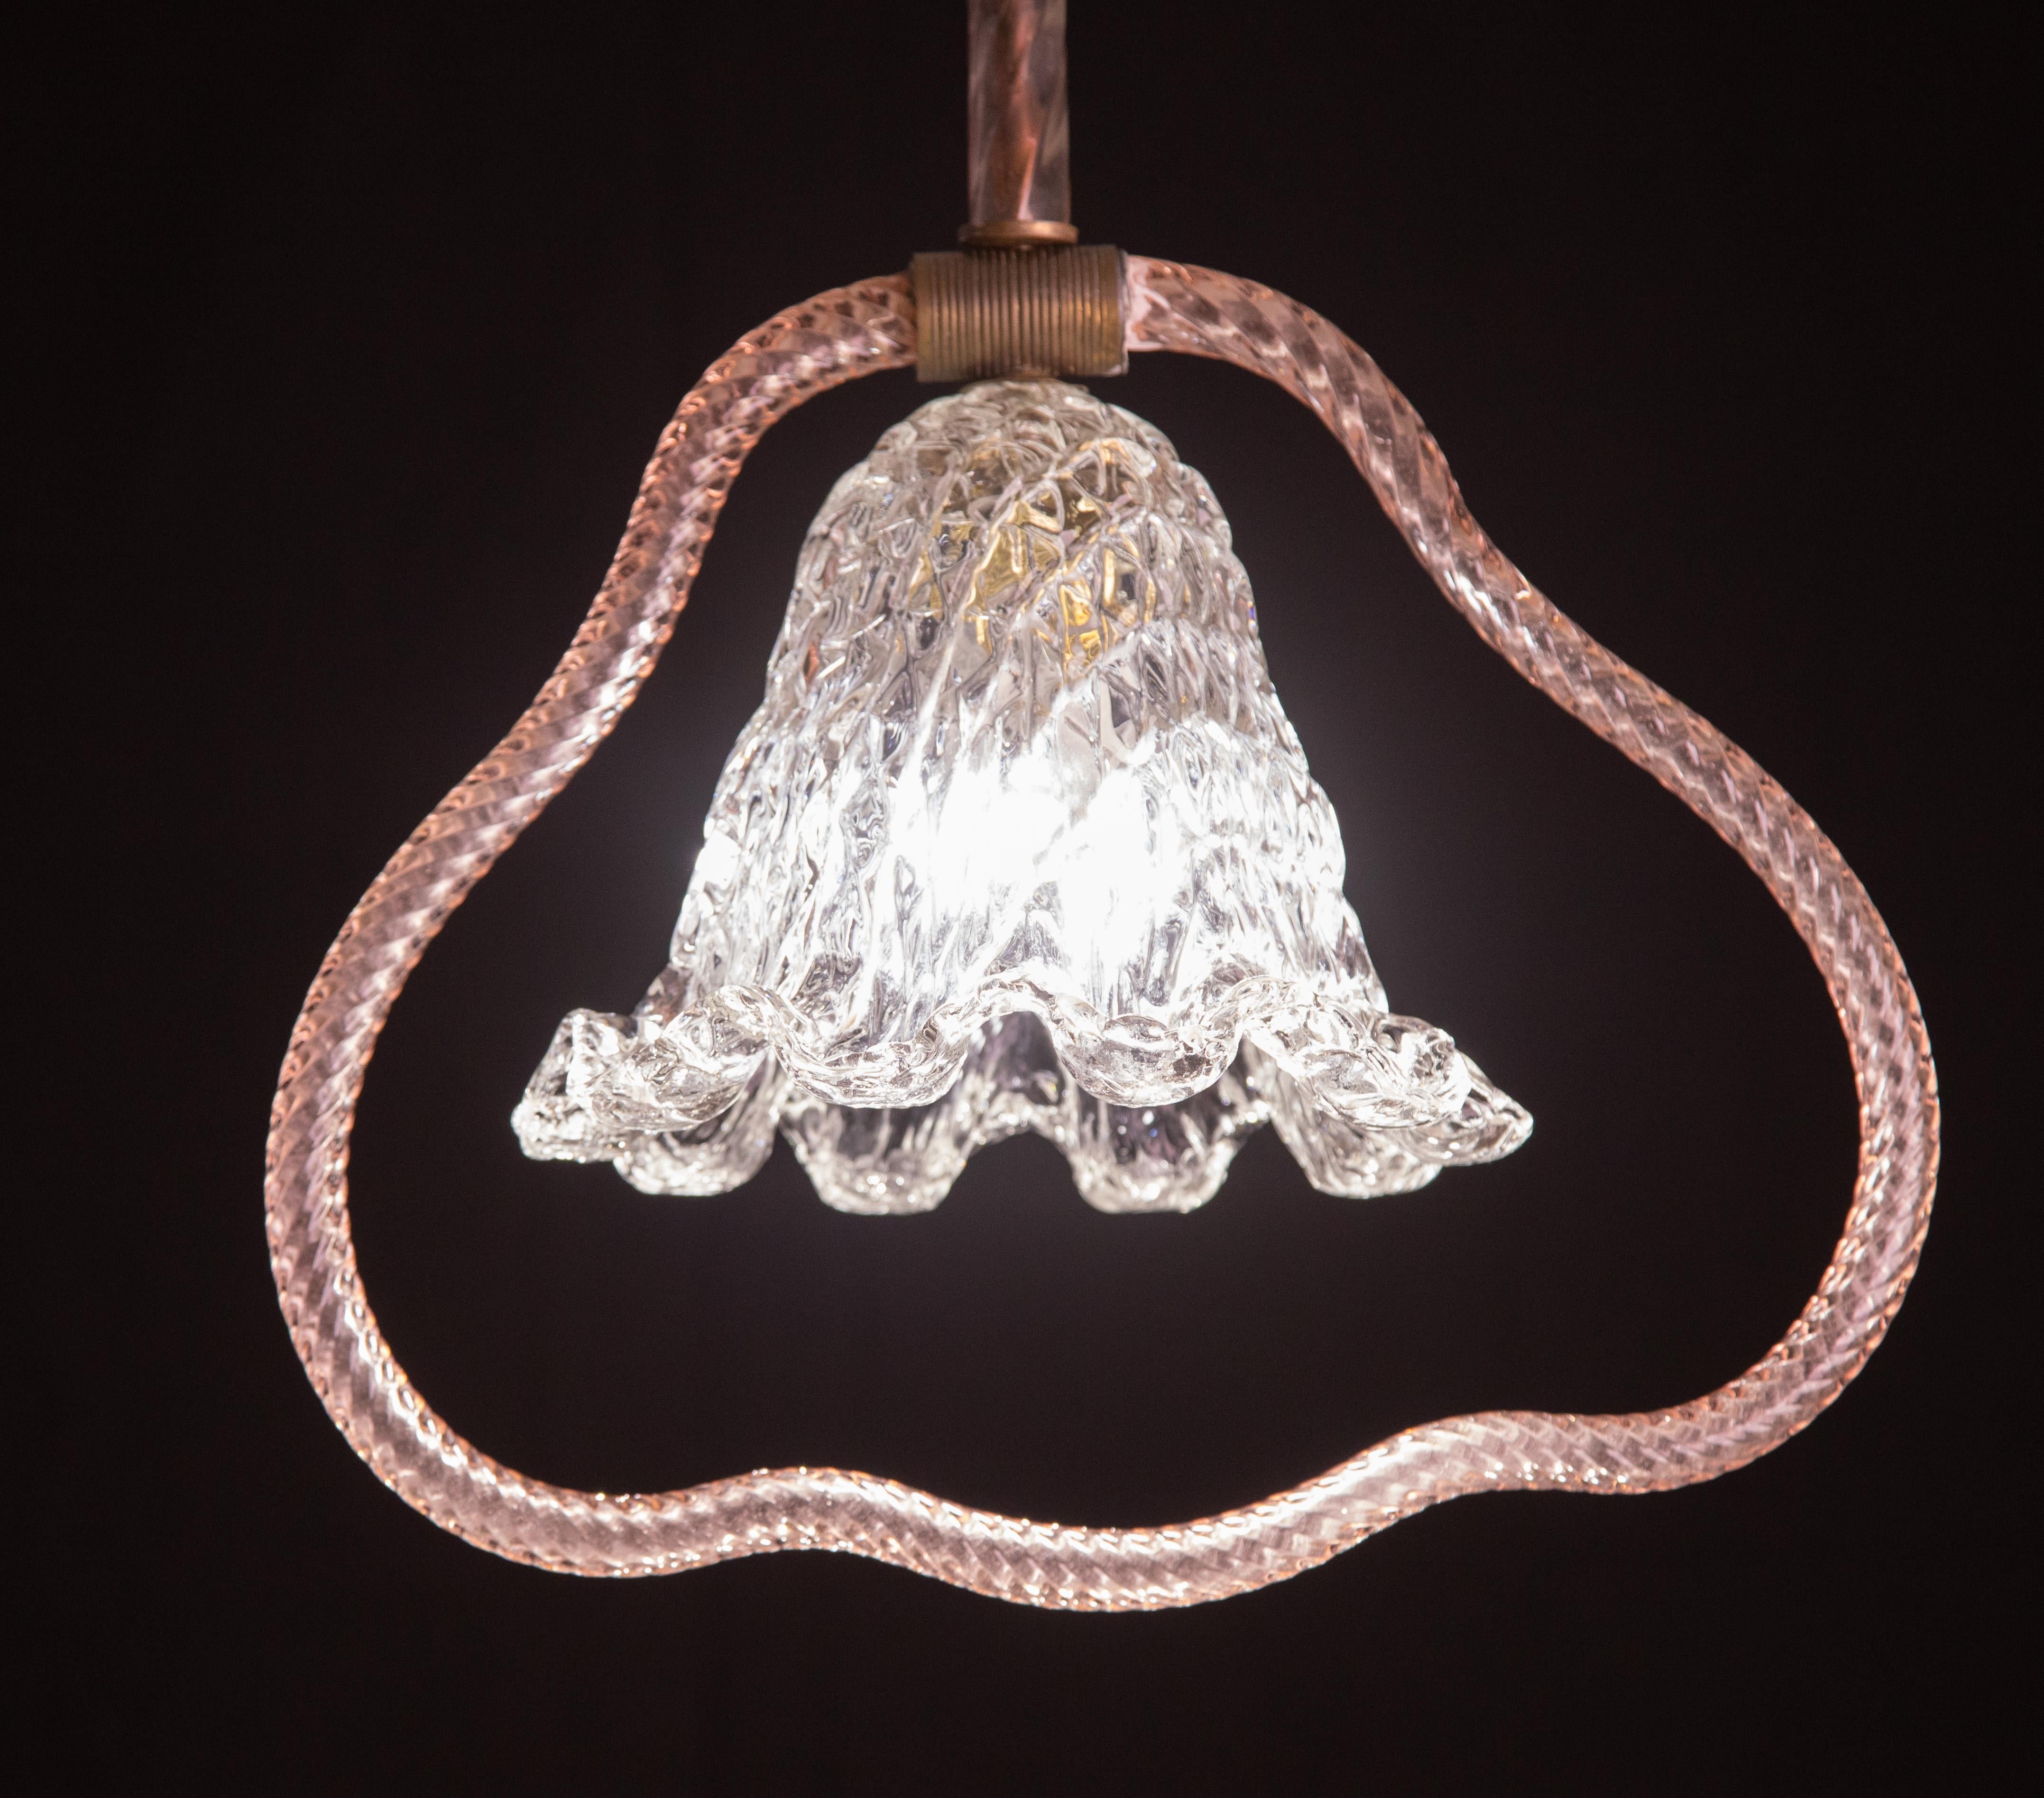 Stunning Murano chandelier by artist Barovier e Toso with rare pink glass.
2 glass are pink, the central cup and the rose are white.
It mounts a European standard e27 lamp.
It measures 80 centimetres in height and 40 centimetres in width.